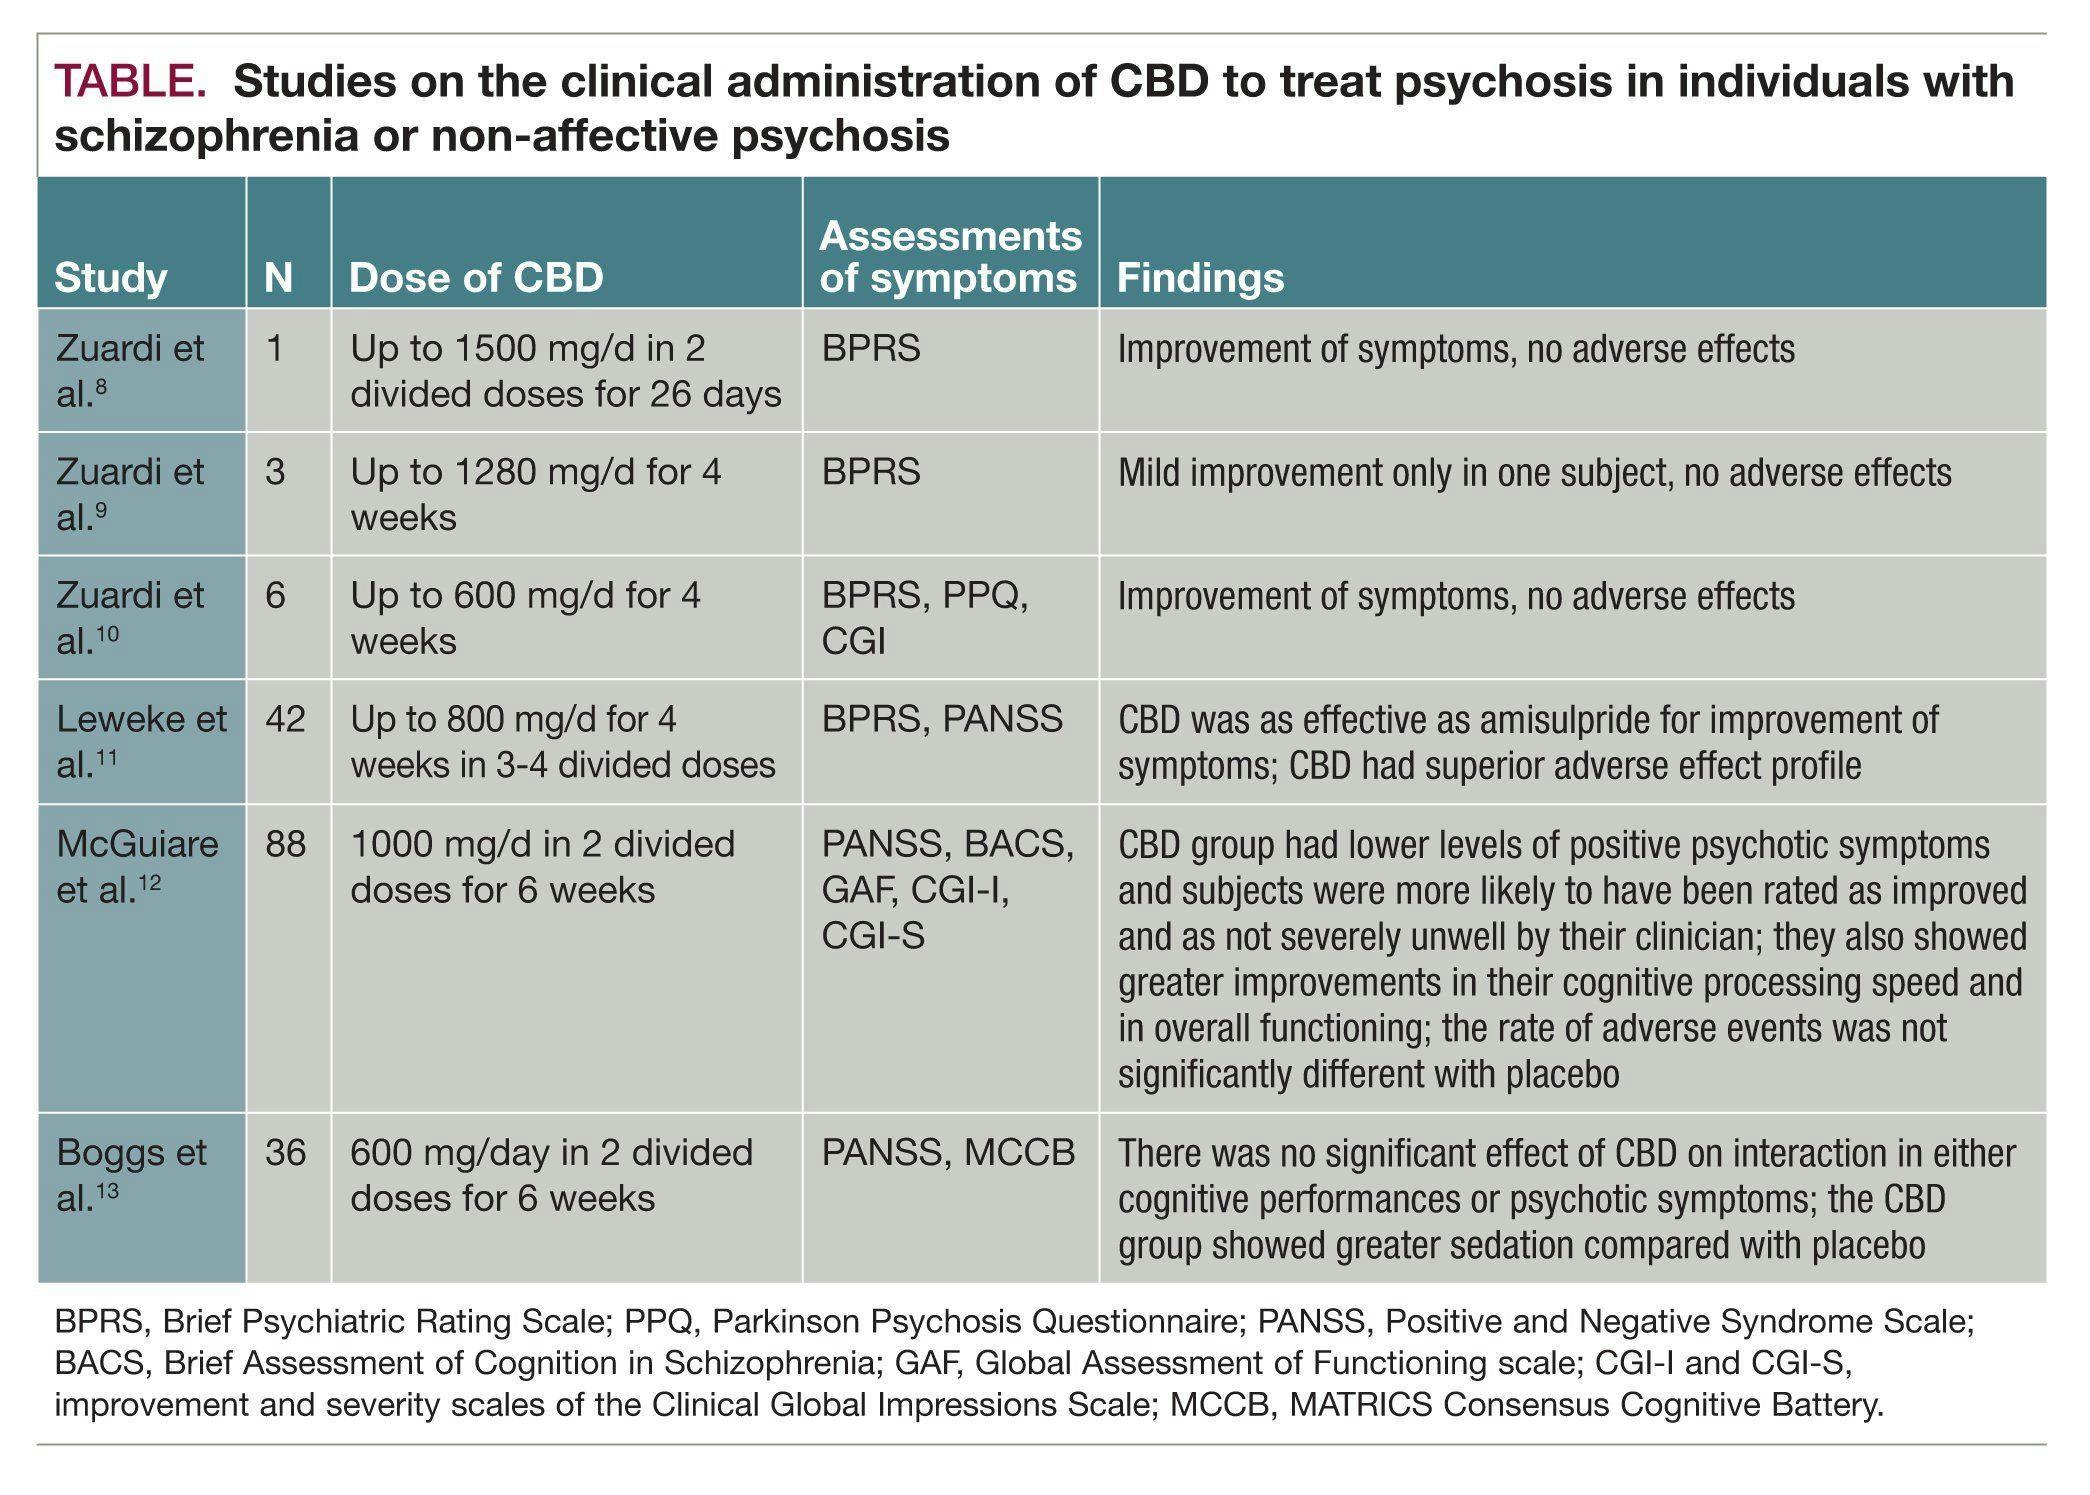 Studies on the clinical administration of CBD to treat psychosis in individuals with schizophrenia or non-affective psychosis